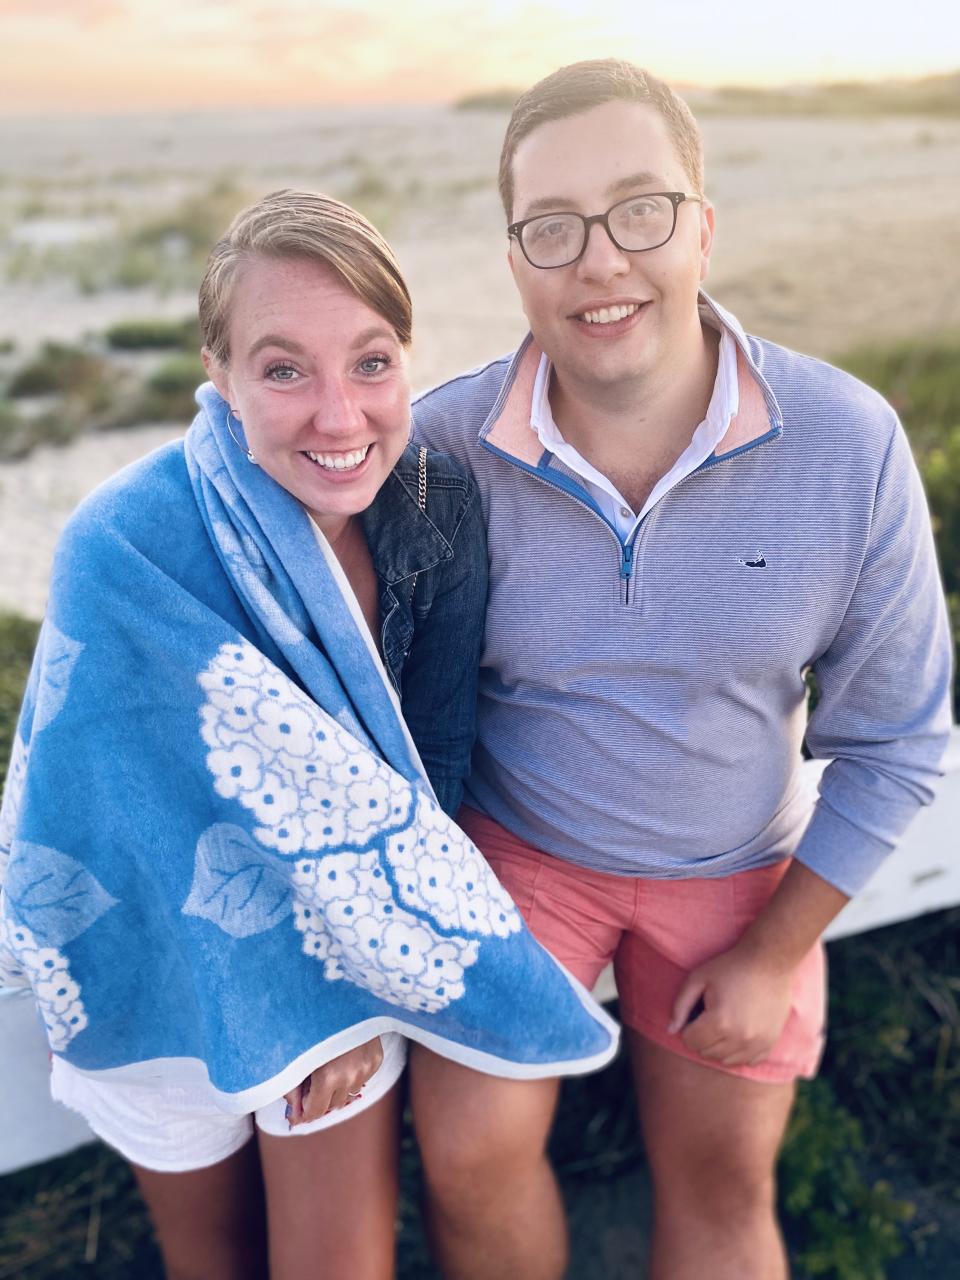 Hailey Murphy and Adam Lemp, pictured, had their wedding plans upended by COVID-19. They postponed their wedding to 2021, but decided to take a first moon, or trip on their original wedding They join one-third of engaged couples in the trend, according to a recent survey by Zola and TravelZoo. (Courtesy of Hailey Murphy)